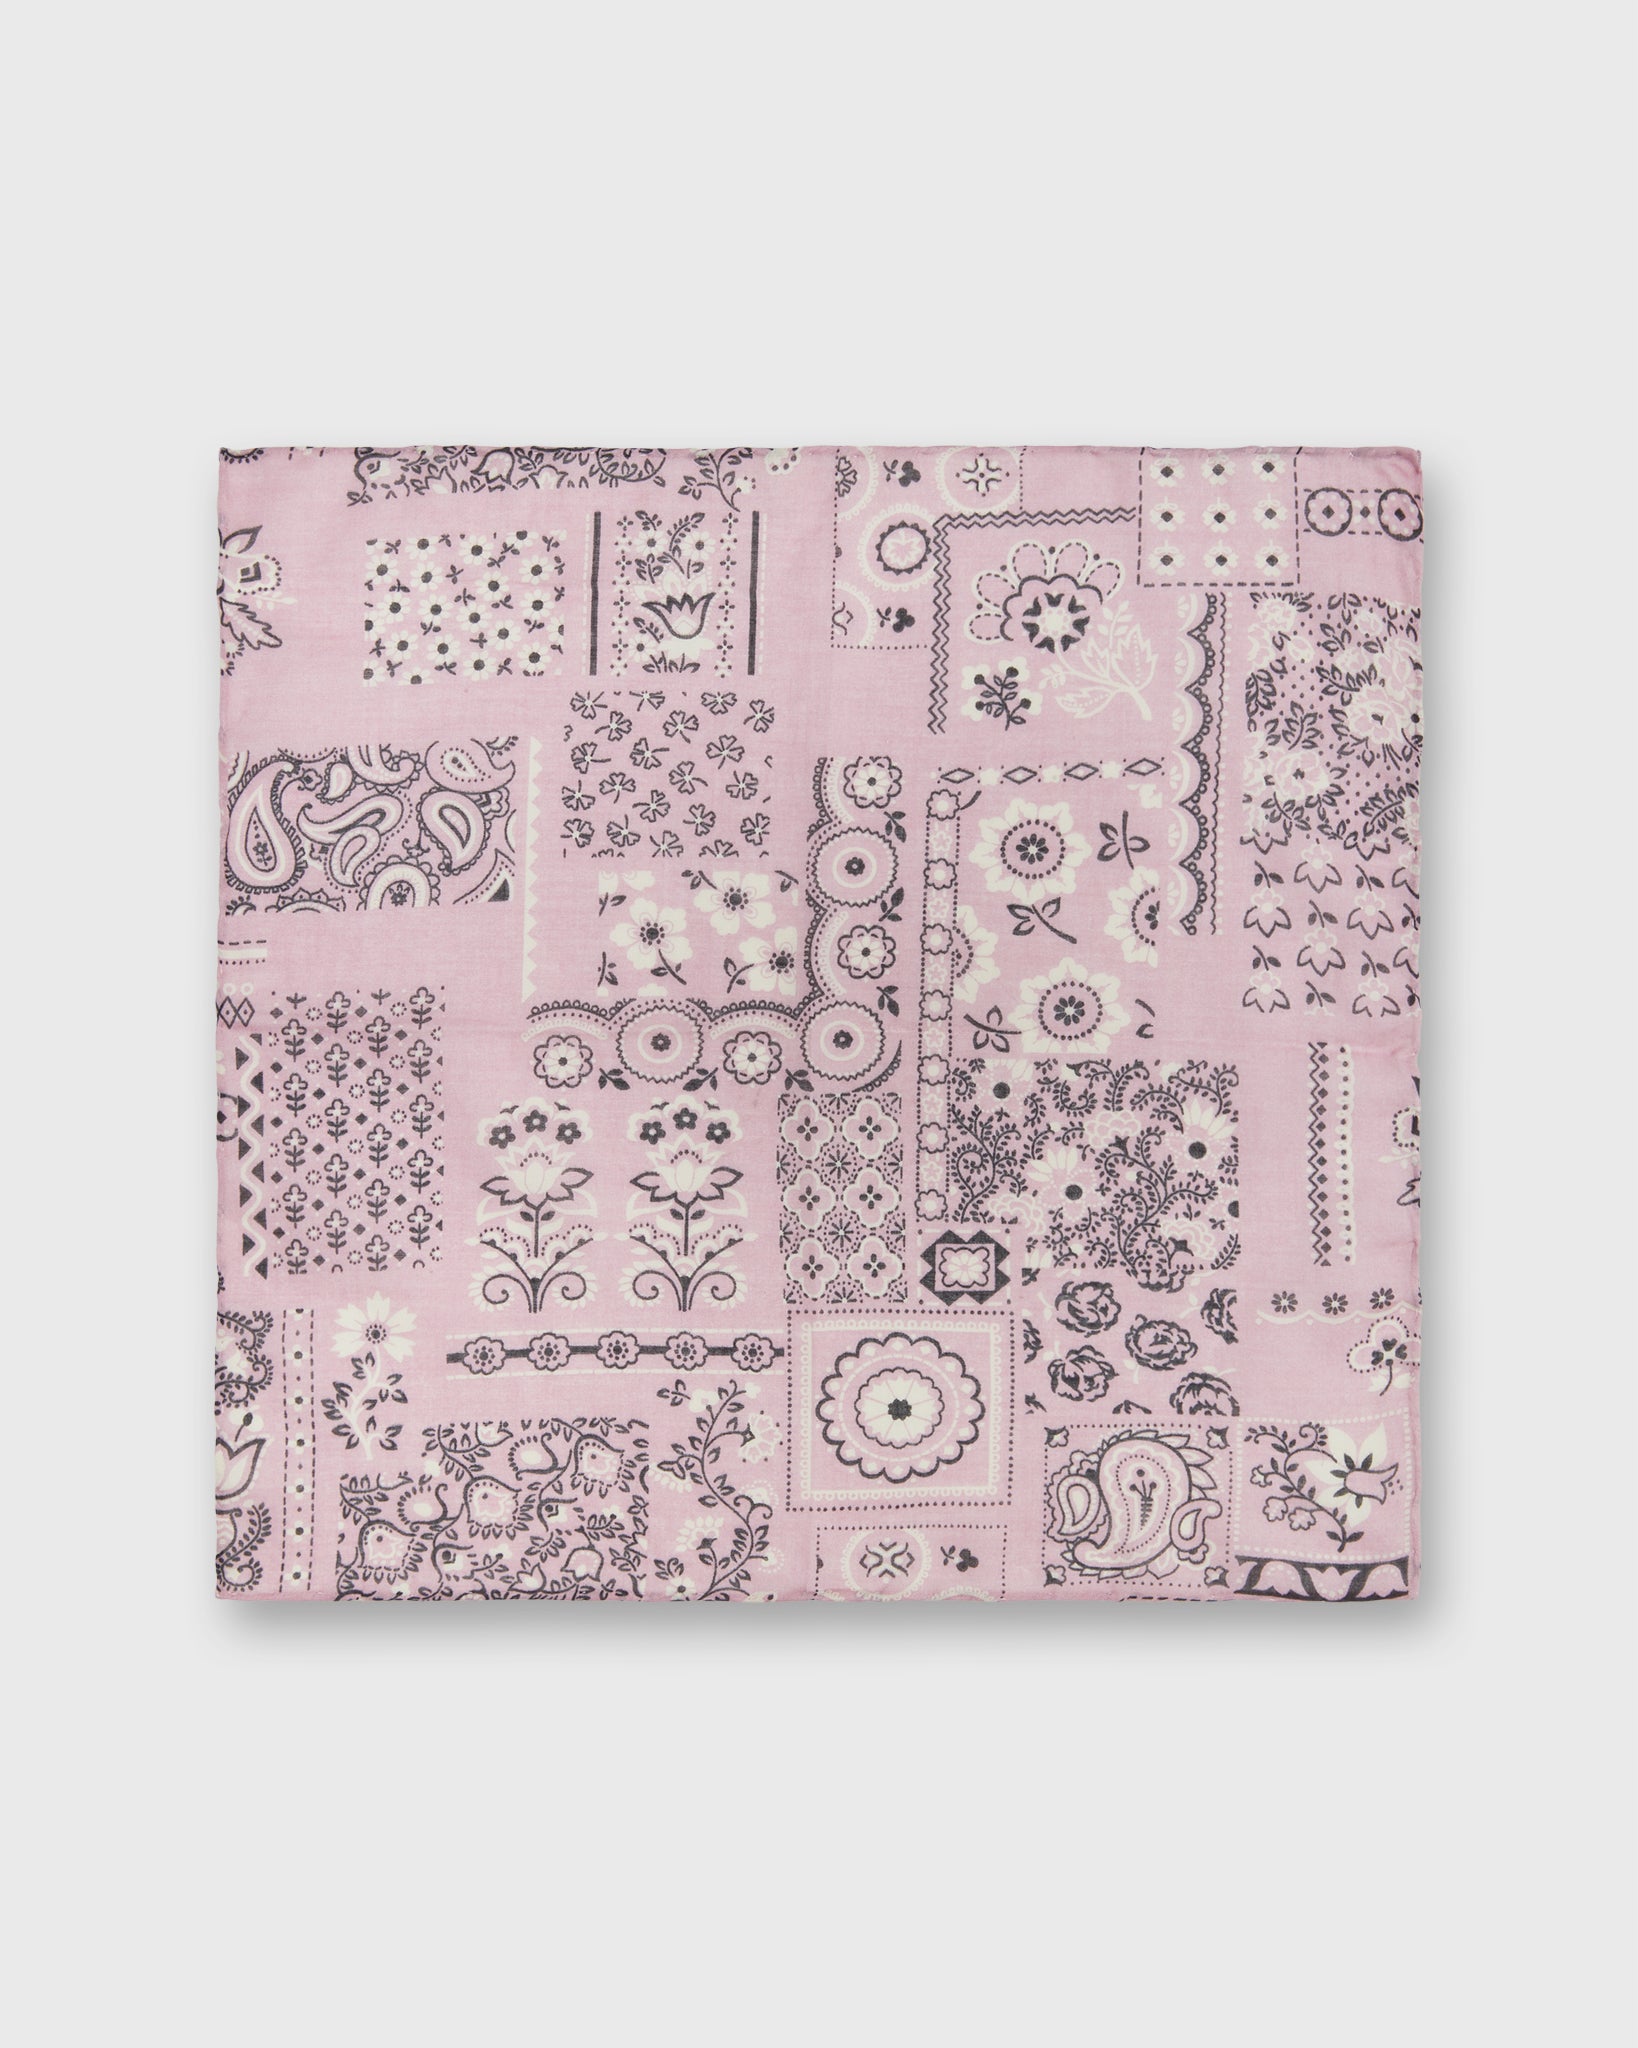 Cotton Print Pocket Square in Pink Patchwork Paisley